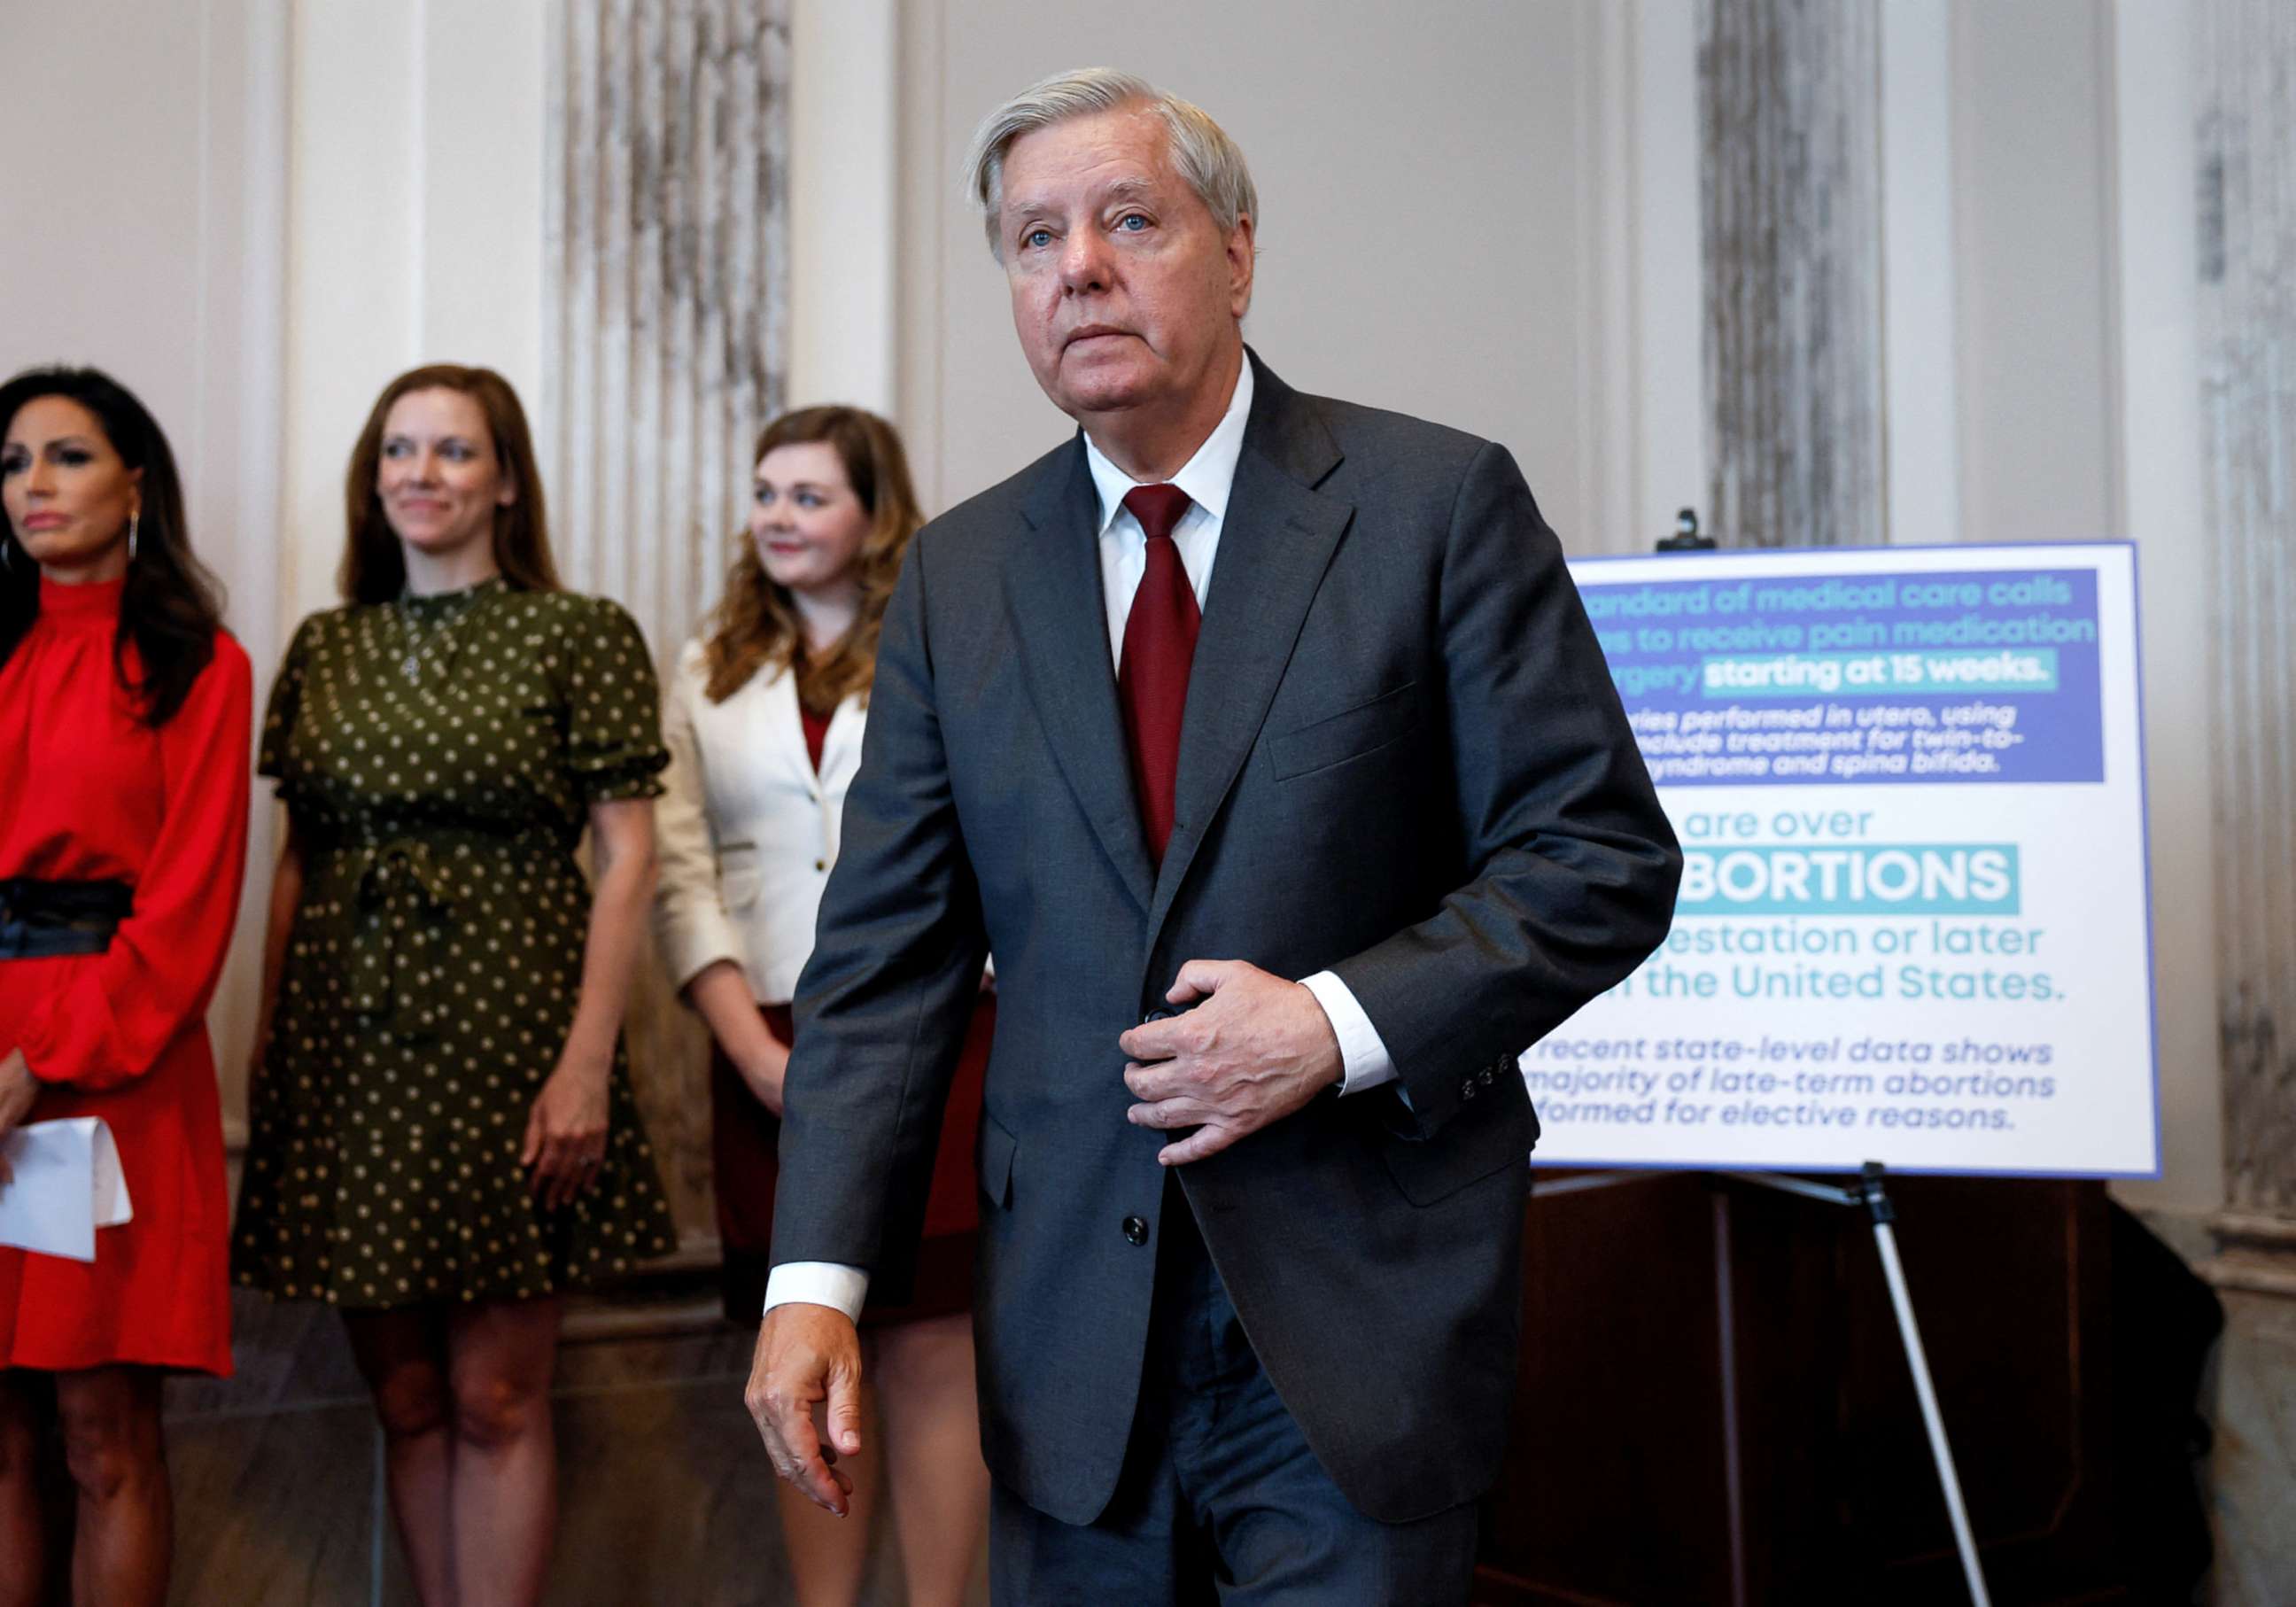 PHOTO: Senator Lindsey Graham unveils a nationwide abortion bill with new restrictions during a news conference on Capitol Hill in Washington, D.C., Sept. 13, 2022.